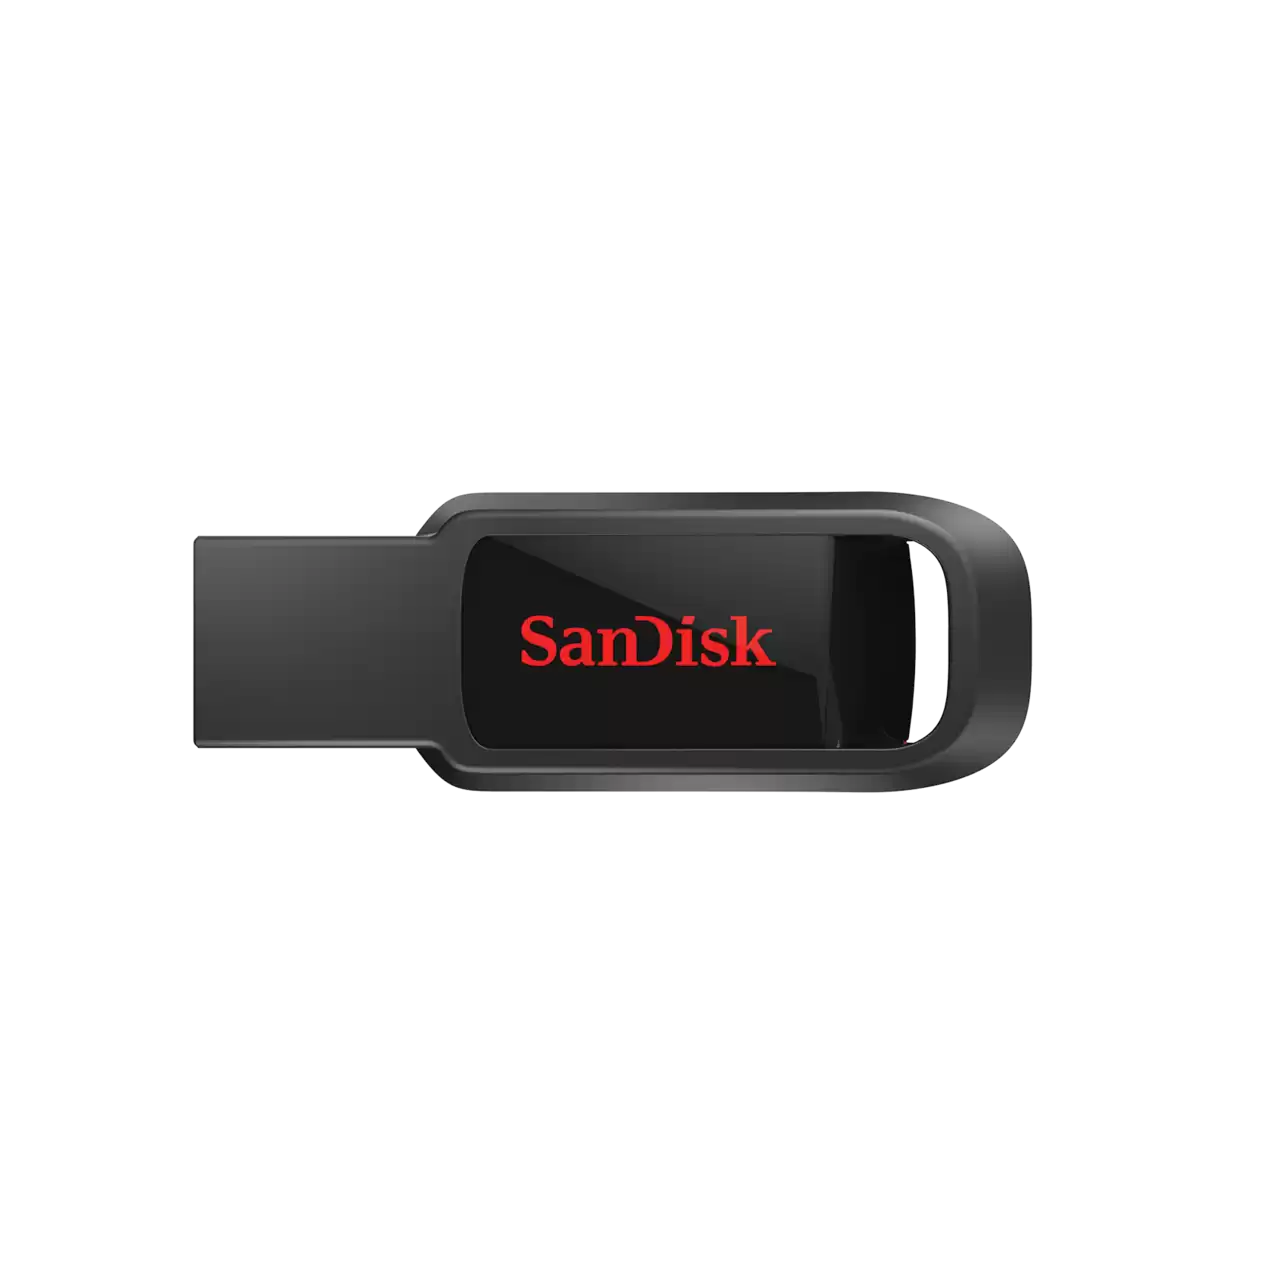 SanDisk Cruzer Spark Compact USB 2.0 Flash Drive for PC and Mac (16GB)